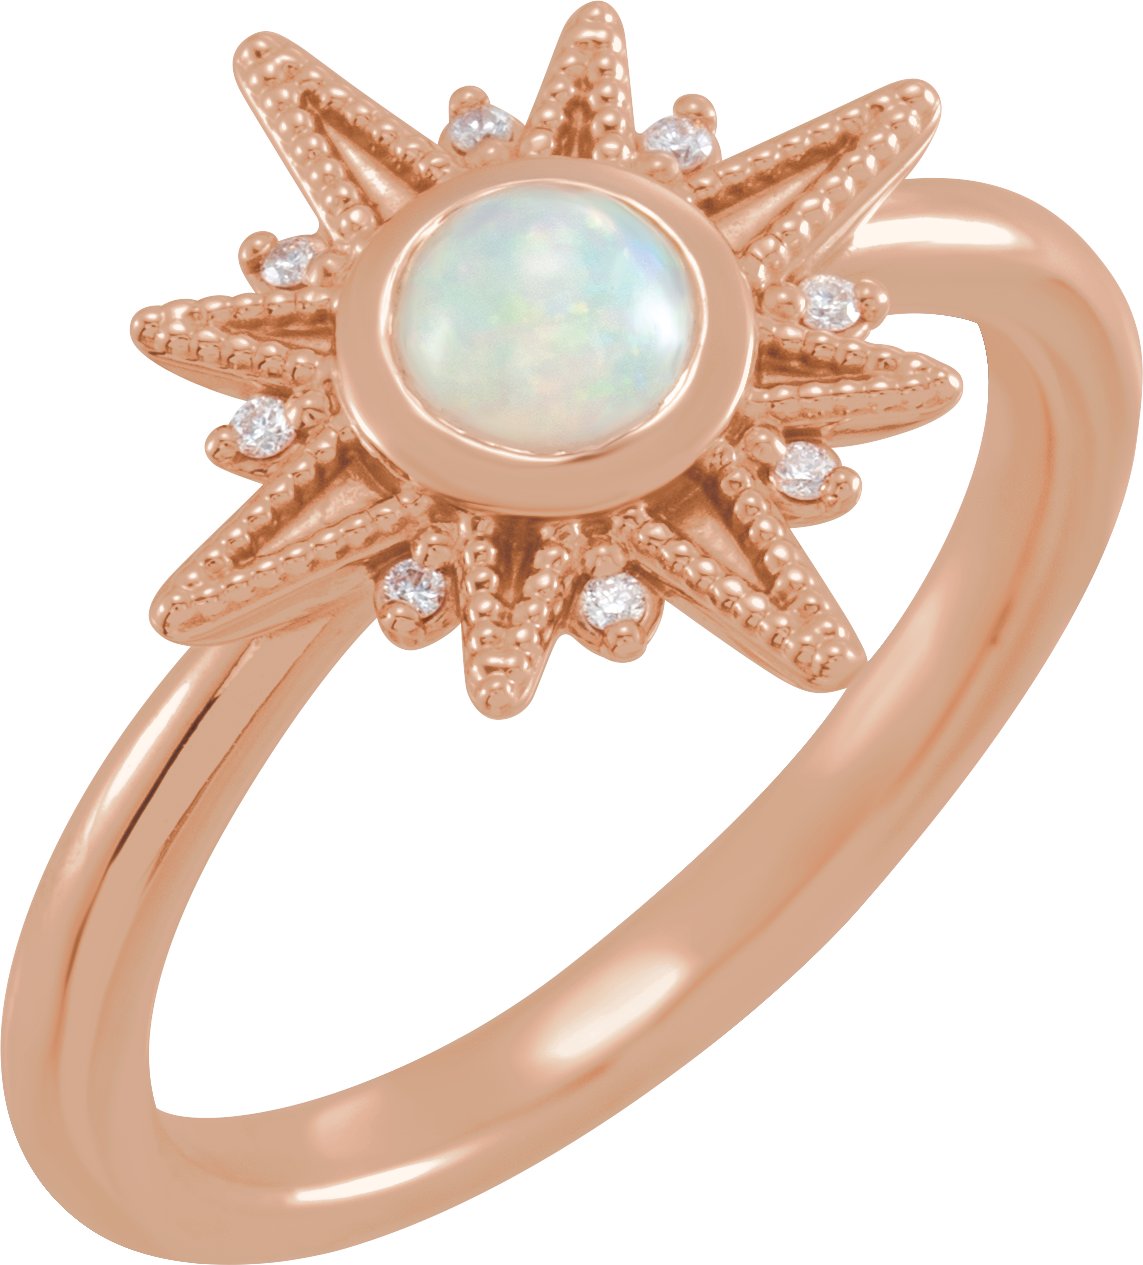 Celestial Cabochon Ring